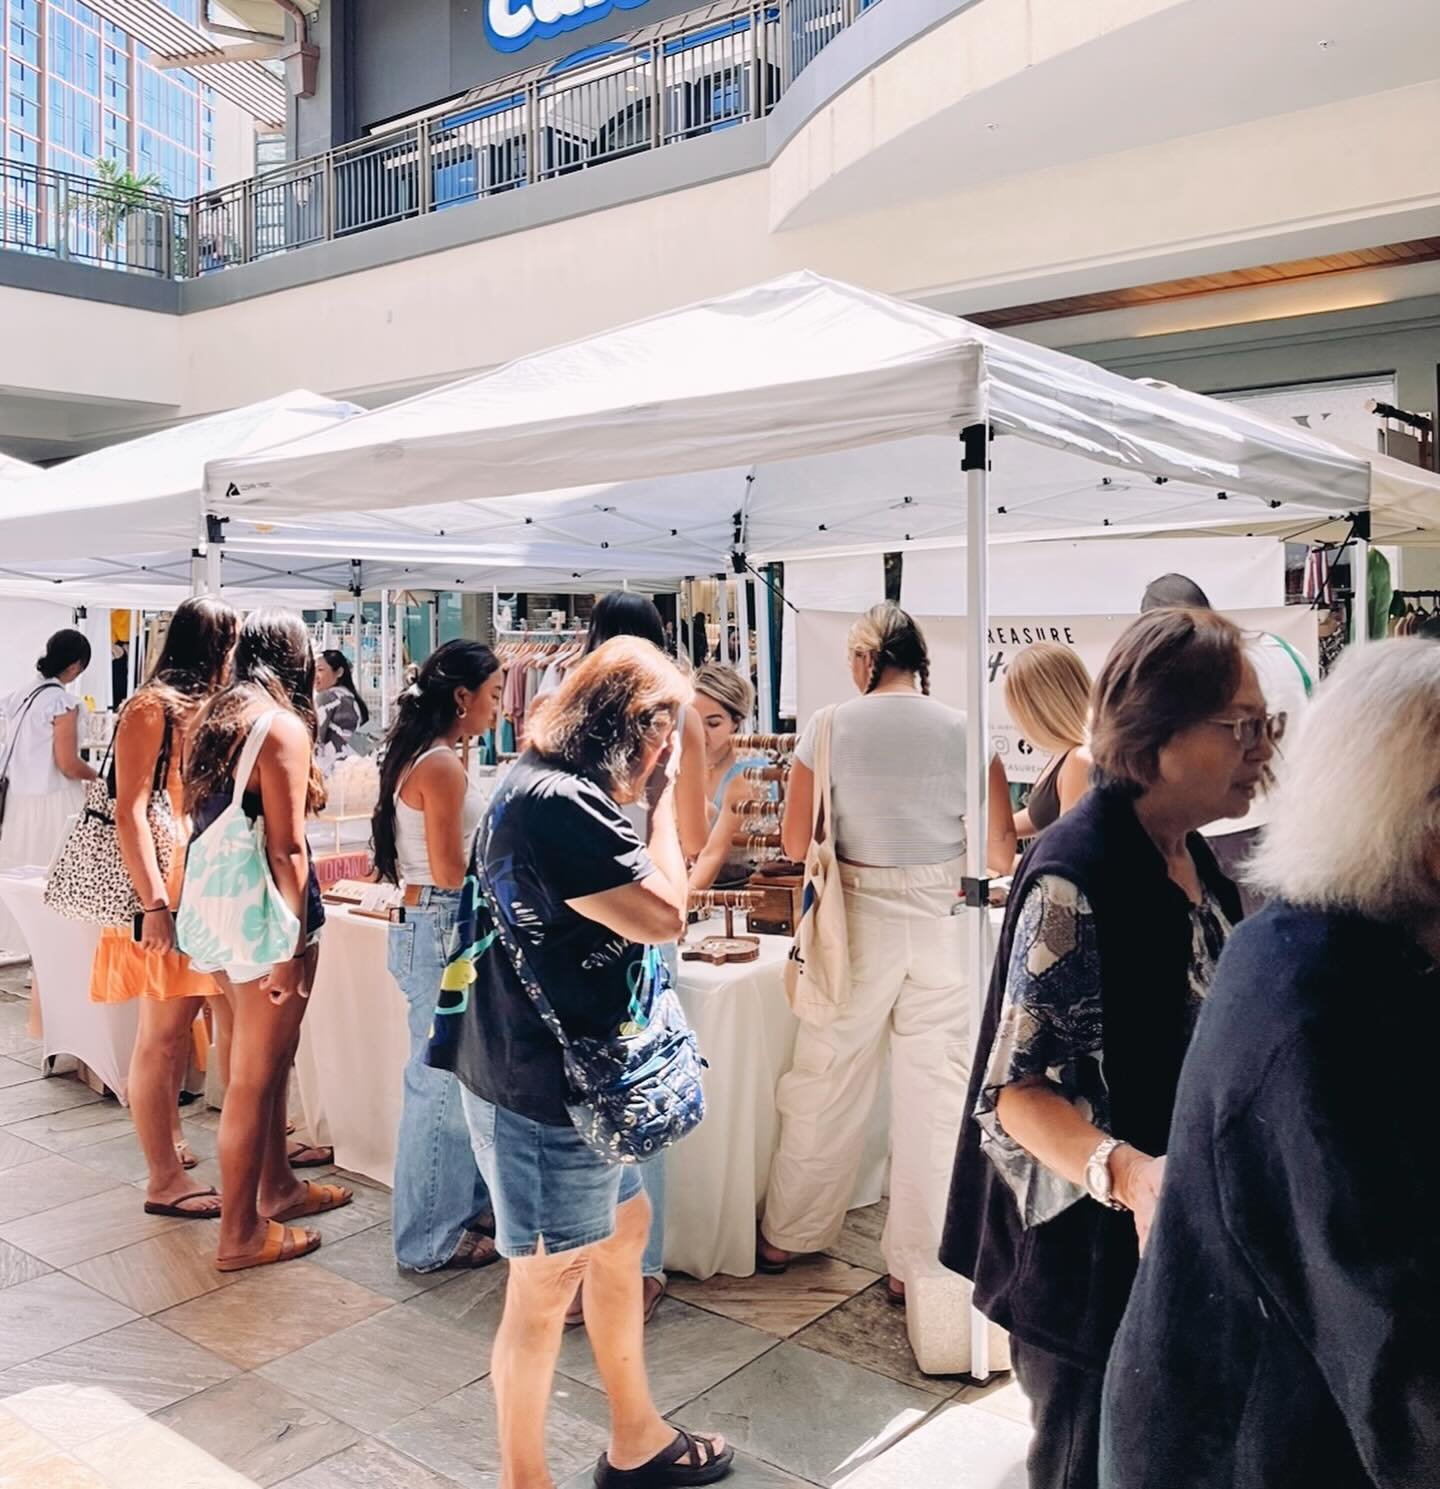 It&rsquo;s a beautiful day for a market! 🌞🎪

Join us 〰️TODAY〰️ at our Ala Moana Center Market from 11am-4pm @alamoanacenter Mall Level 2, Mauka Wing! 📍

There will be 50+ curated small businesses to browse + shop 🛍️ Come see all of the amazing lo